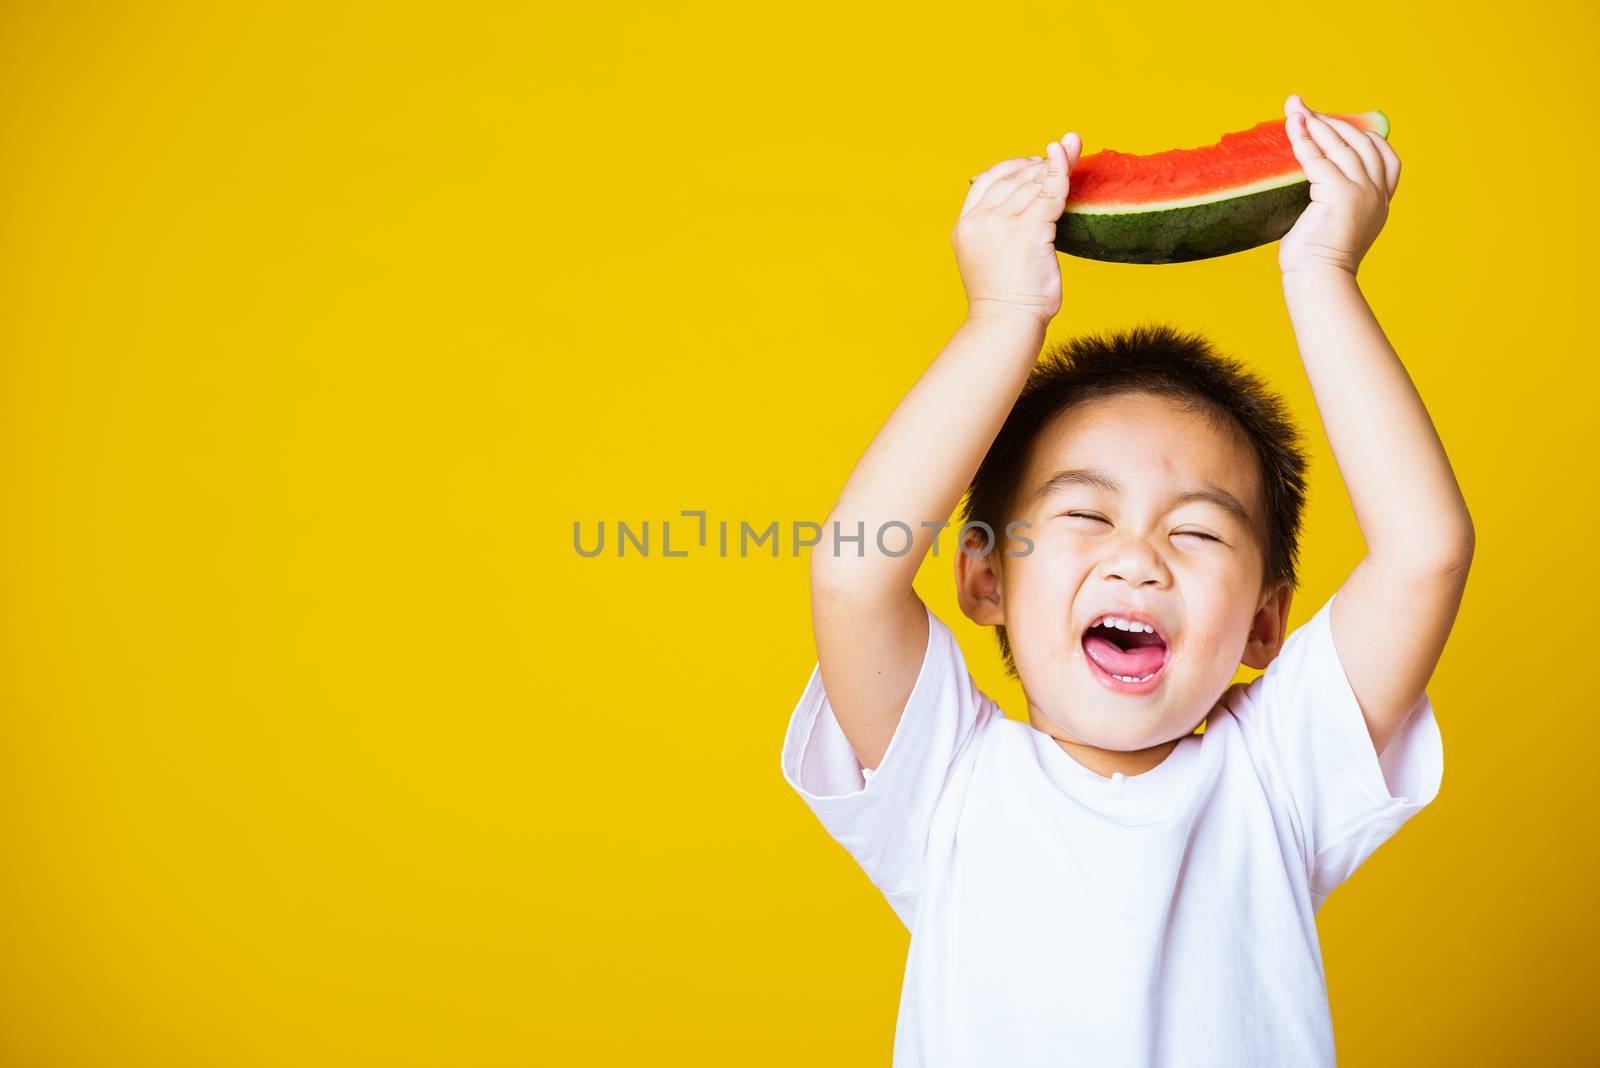 Happy portrait Asian child or kid cute little boy attractive laugh smile playing holds cut watermelon fresh for eating, studio shot isolated on yellow background, healthy food and summer concept